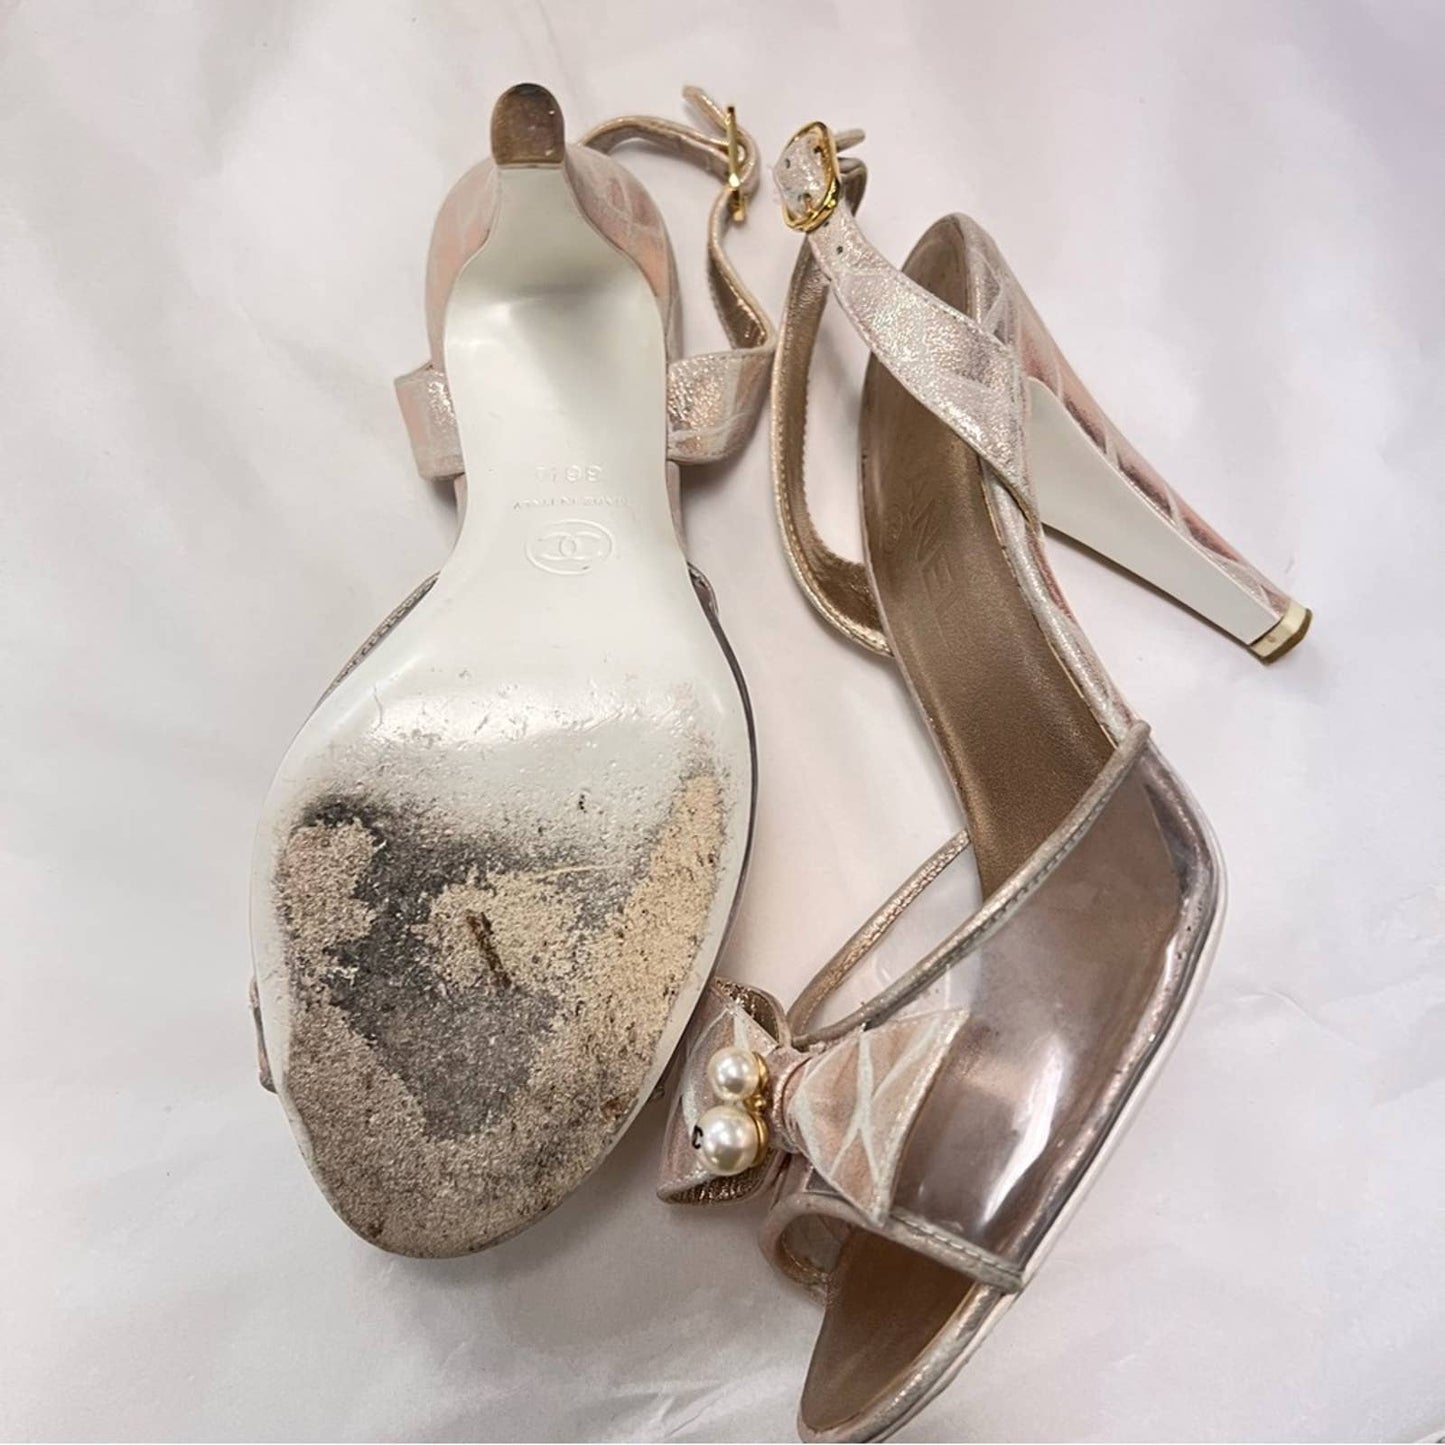 CHANEL Champagne D’orsay Bow Top Heels 36.5”